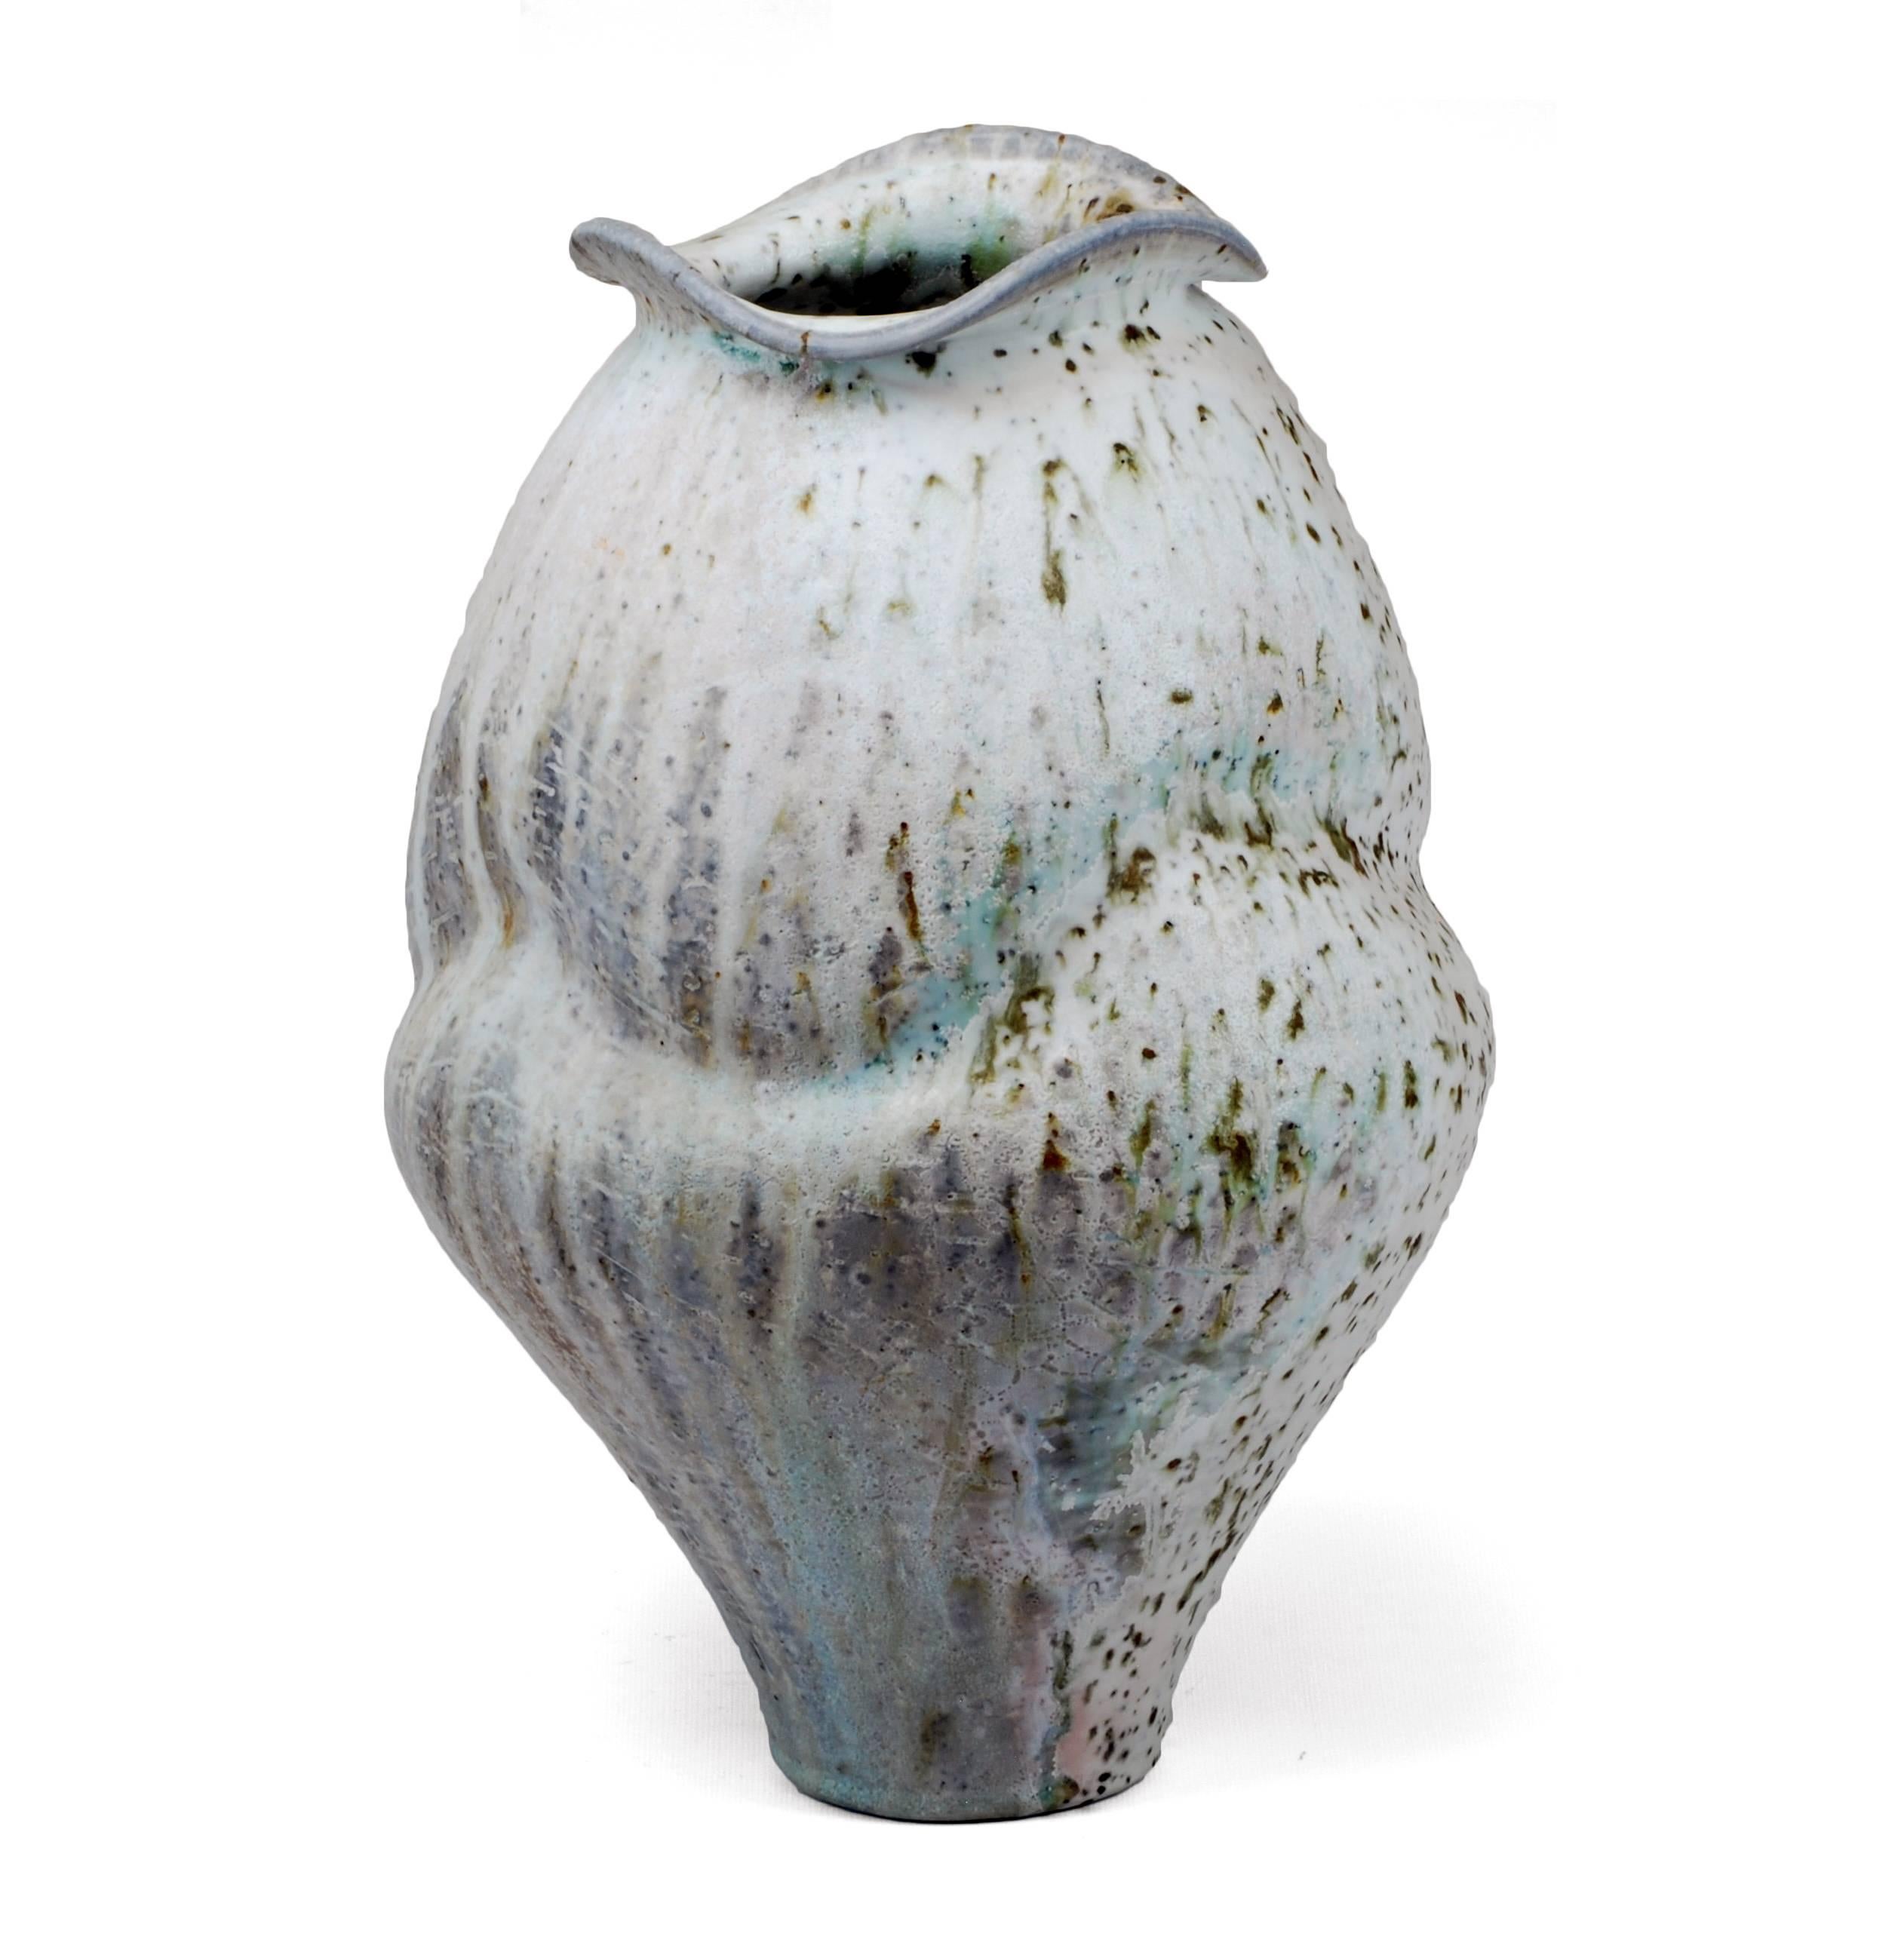 Perry Haas Abstract Sculpture - Medium Porcleian Jar with Shino Glaze and Iron Inclusions, Wood Fired